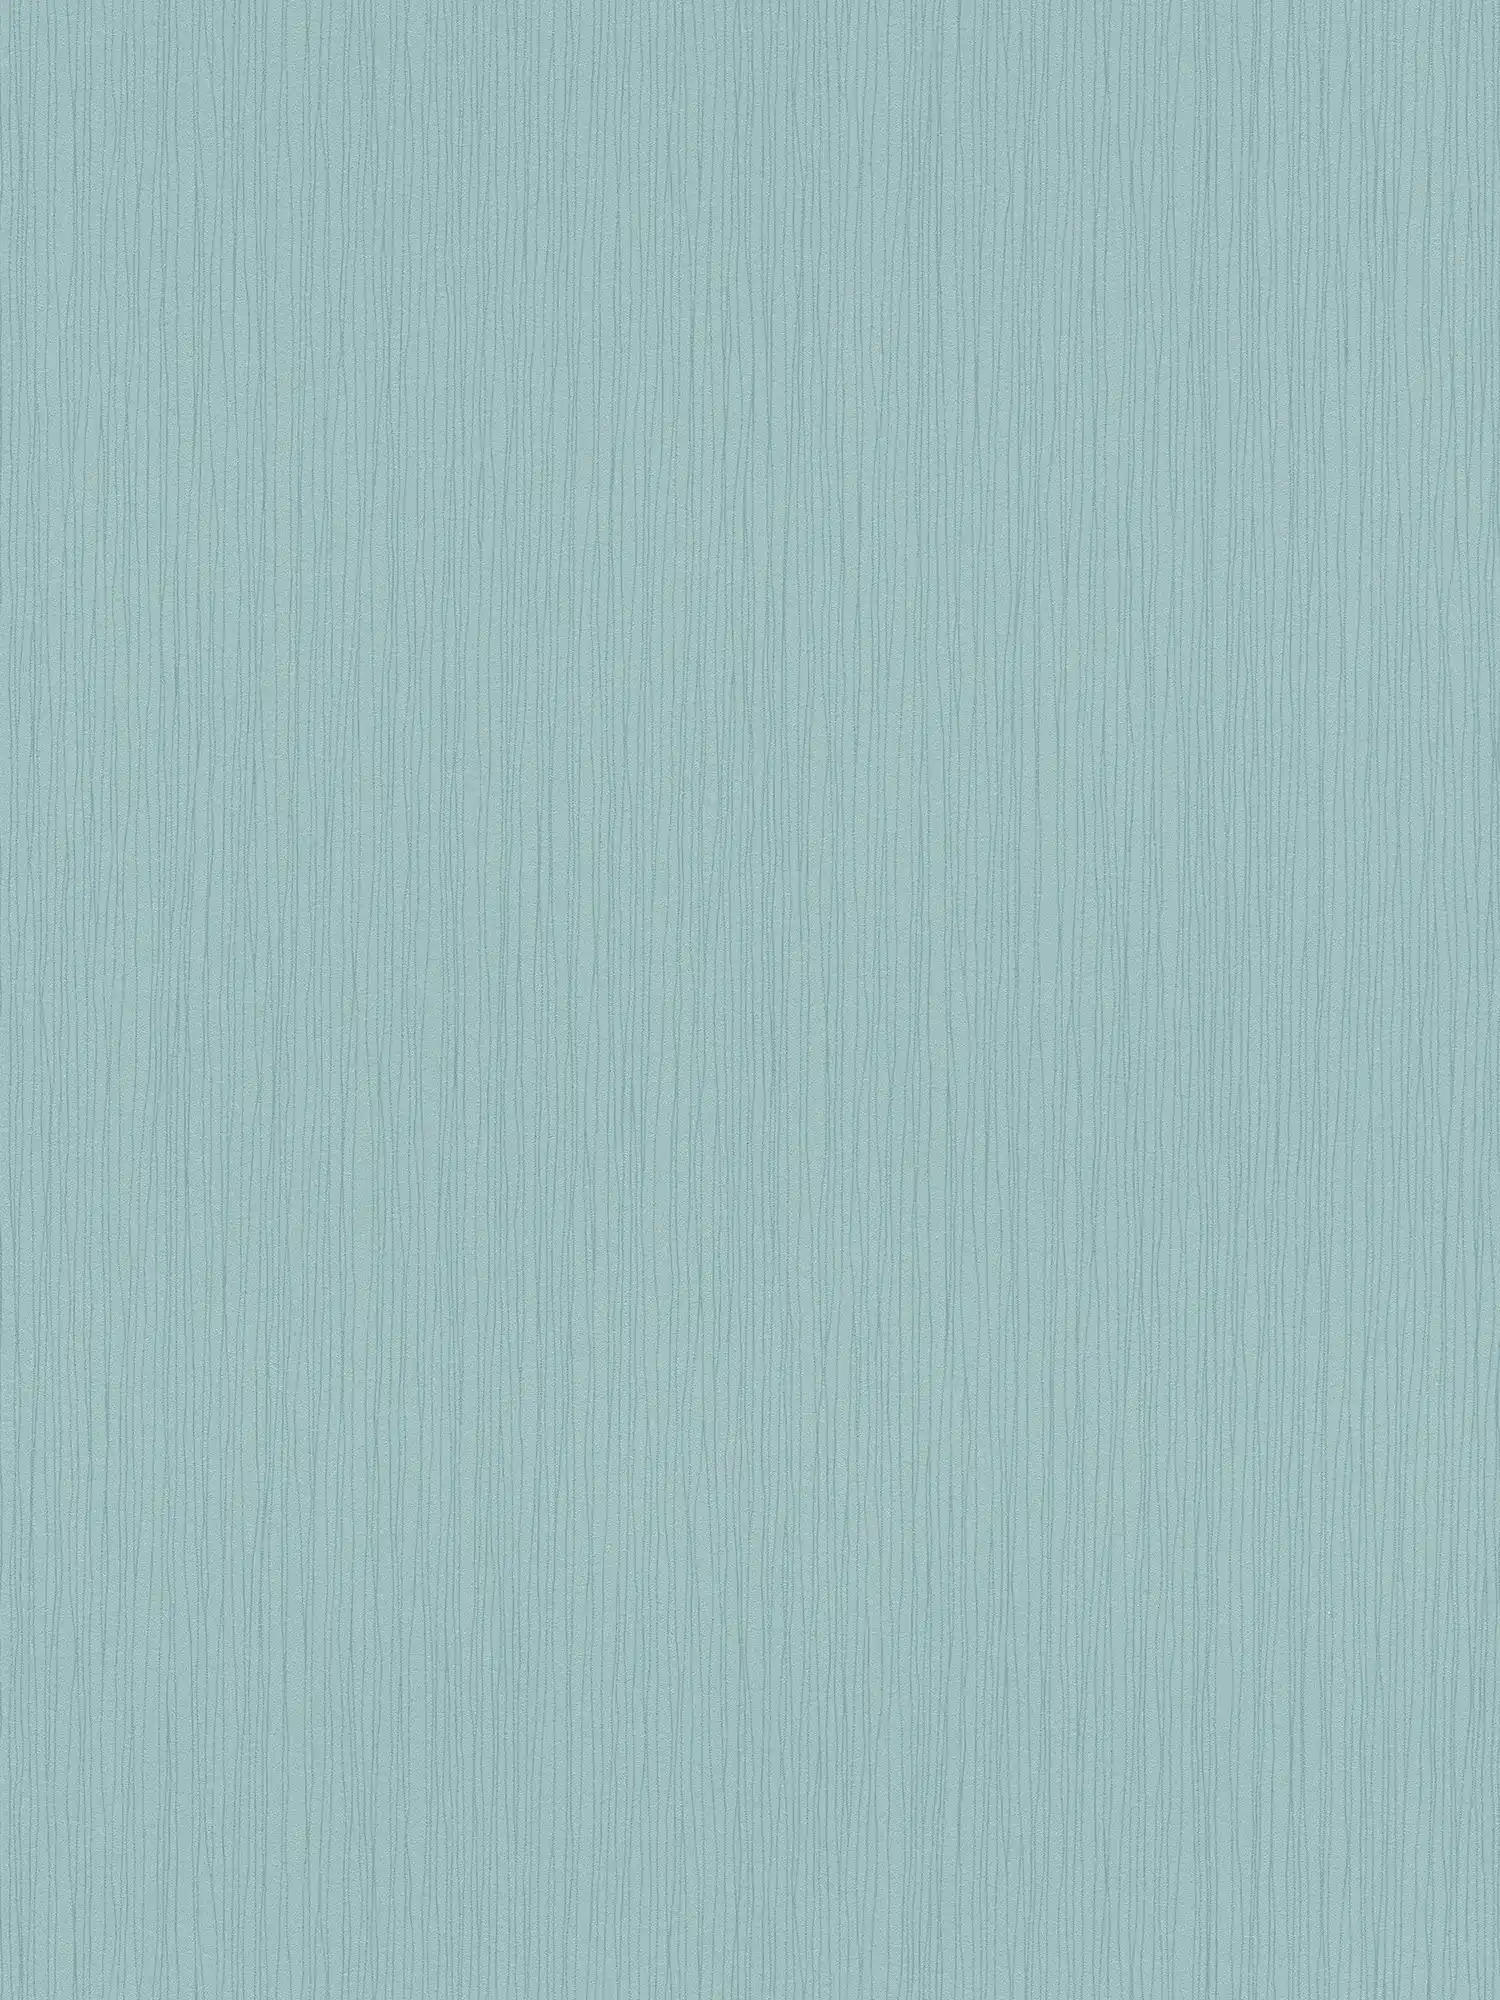 Nursery wallpaper for boys with line structure - blue
